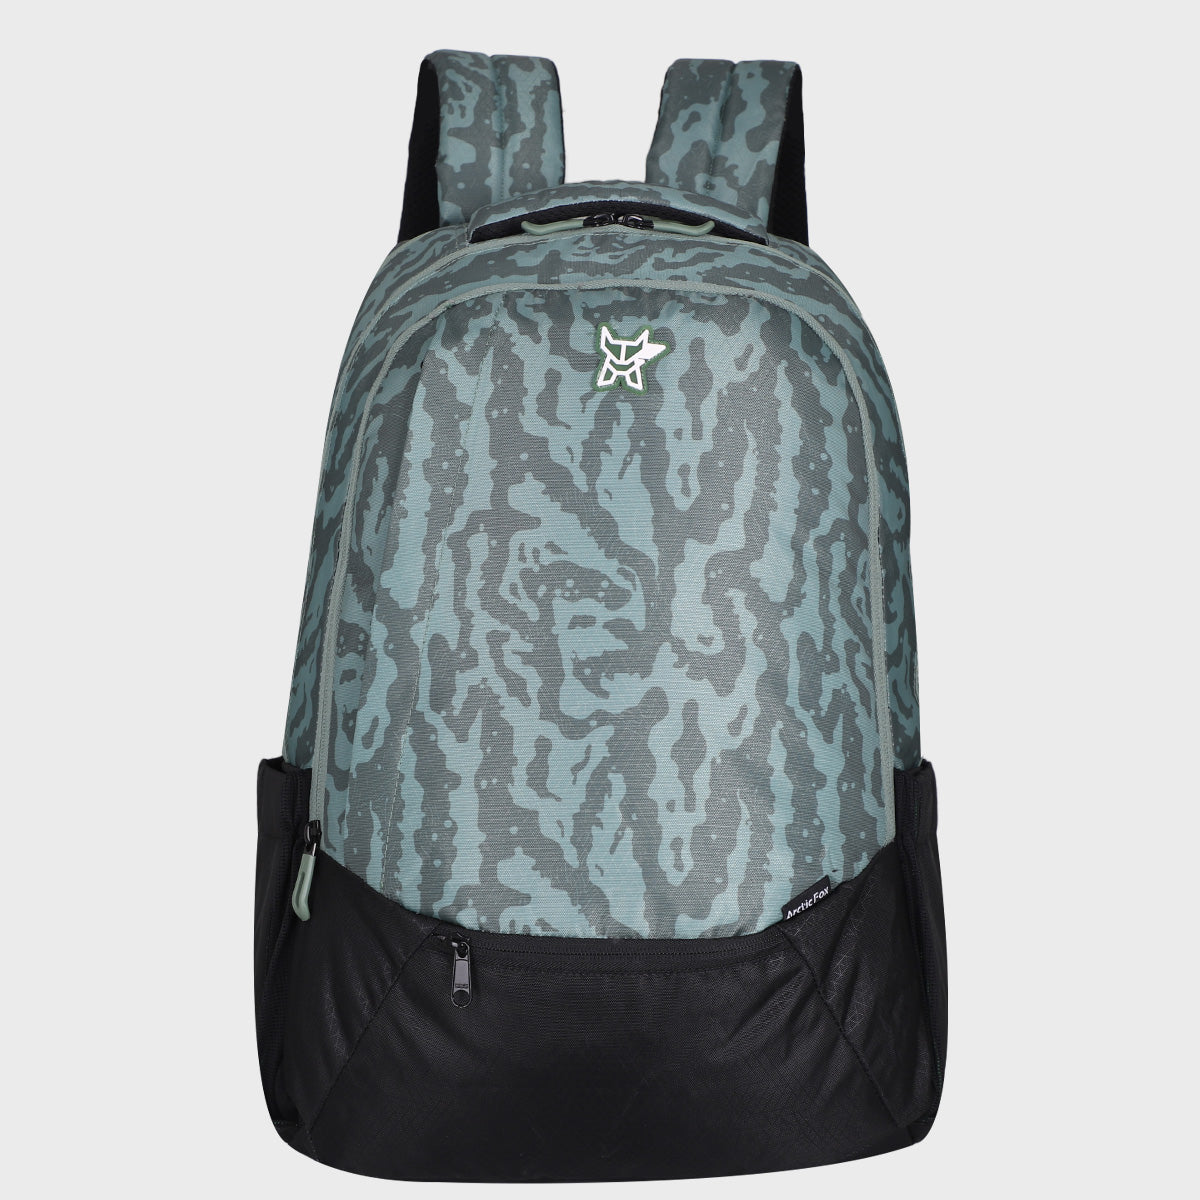 Buy Arctic Fox Honor Polyester Laptop Backpack for 15.5 Inch Laptop (35 L,  Water Repellent Fabric, Black) Online - Croma